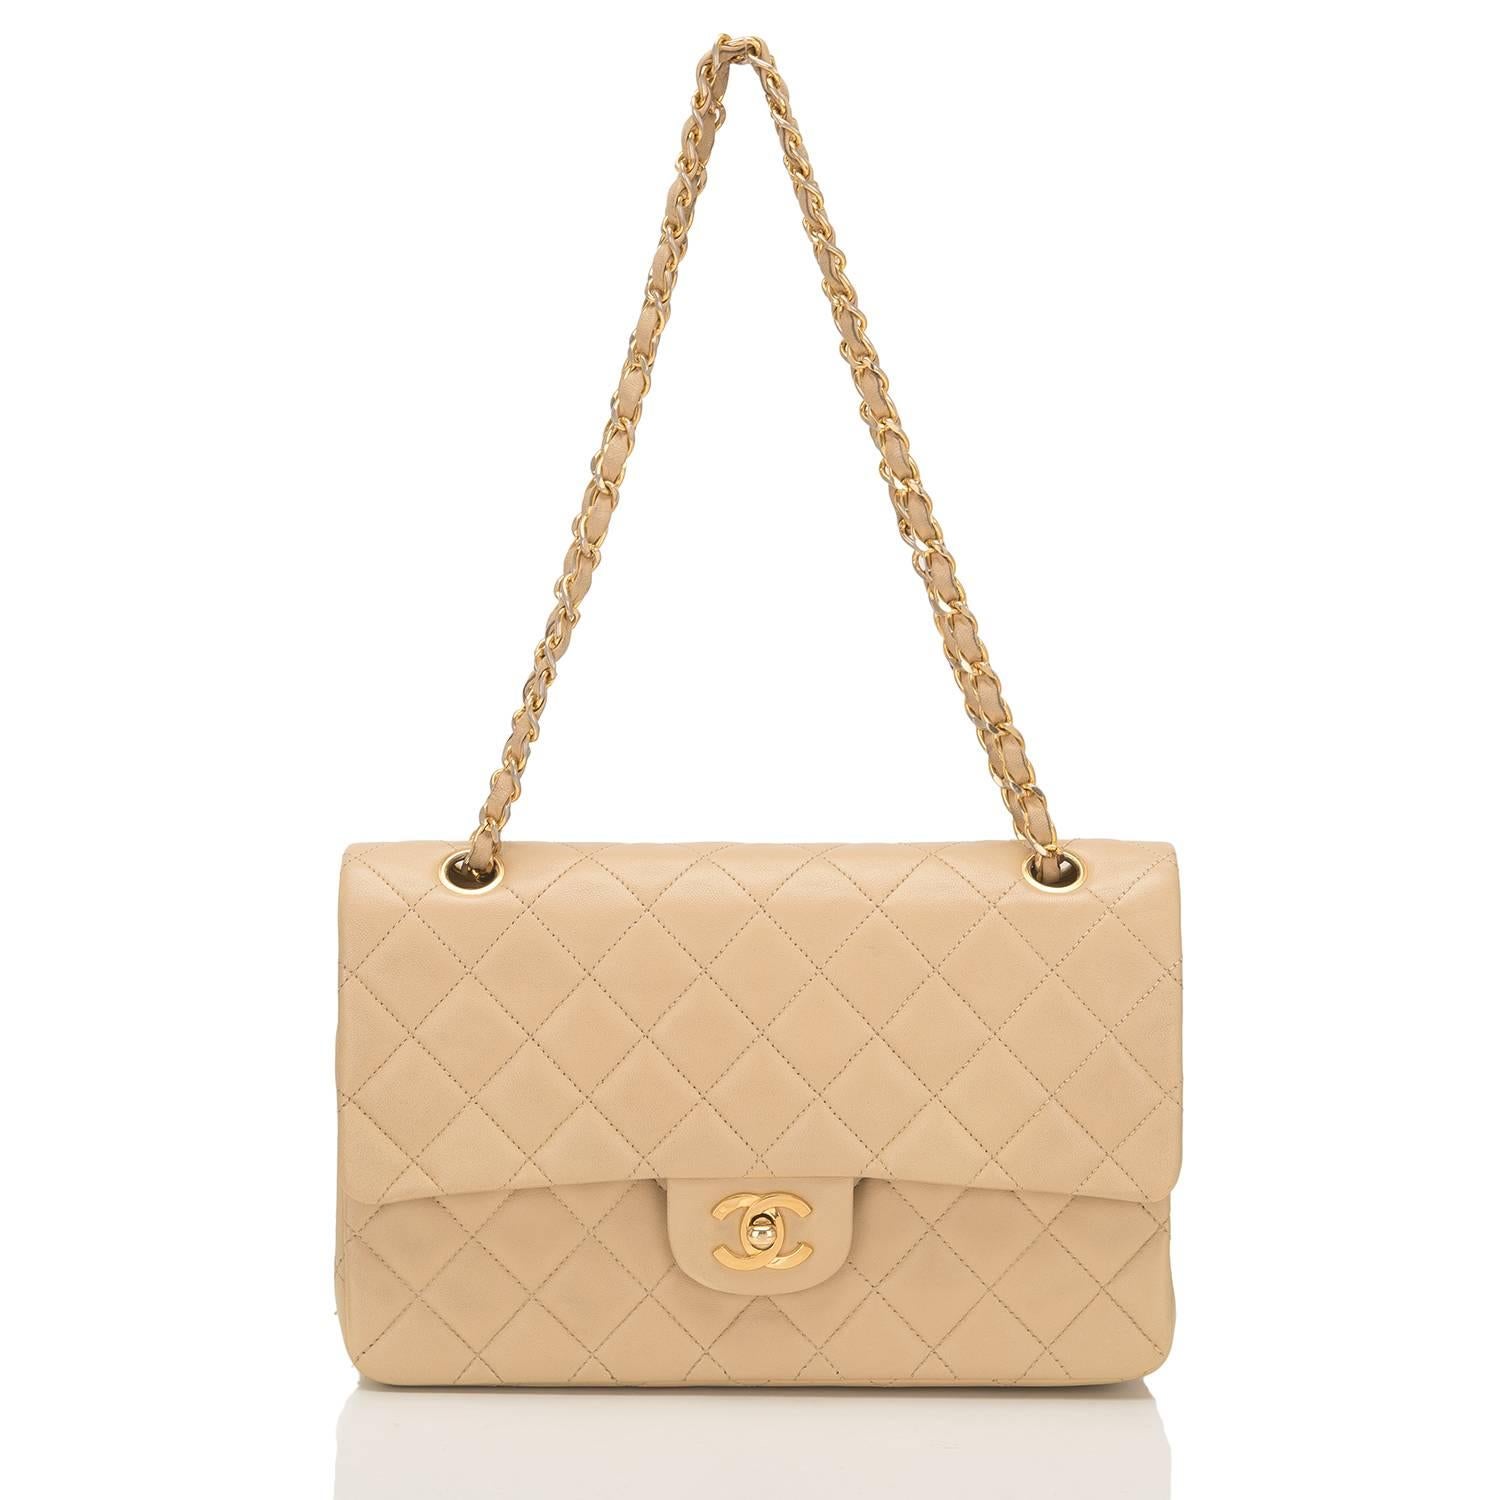 Chanel Vintage Beige Quilted Lambskin Medium Classic Double Flap Bag 2